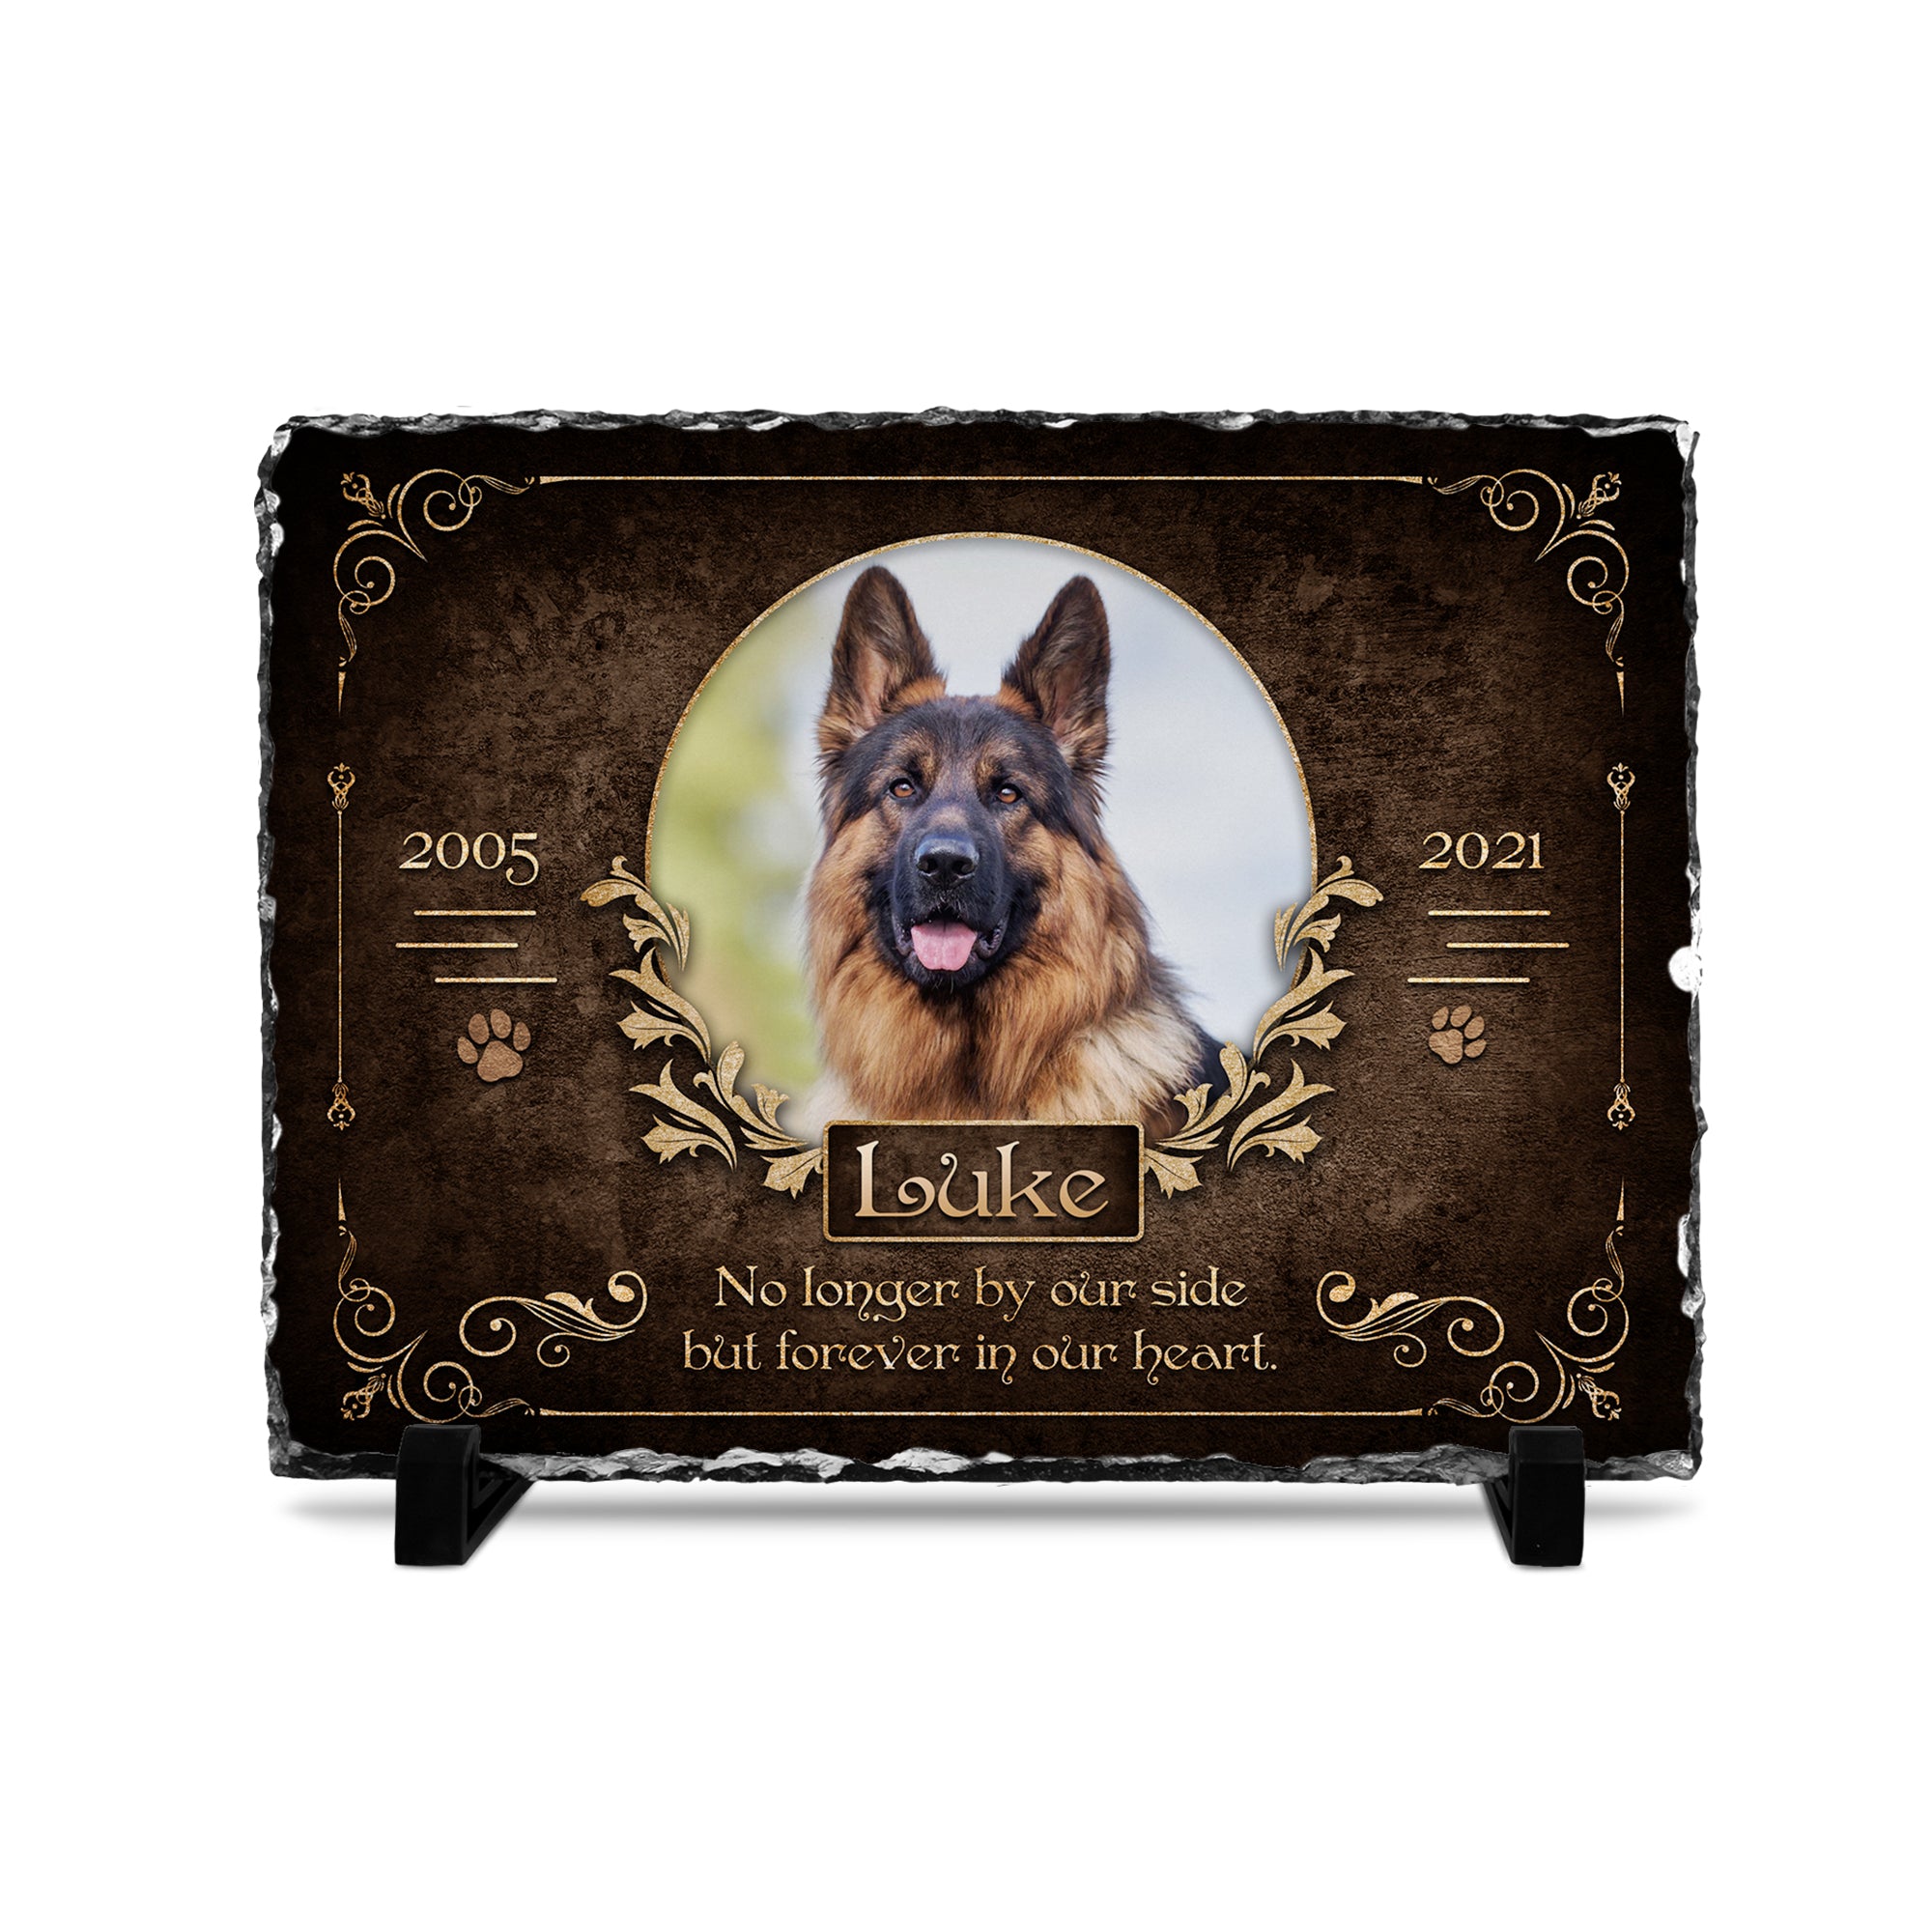 Personalizy Store Slate plaque Custom Photo, Personalized Slate Plaque, Pet Memorial Gifts